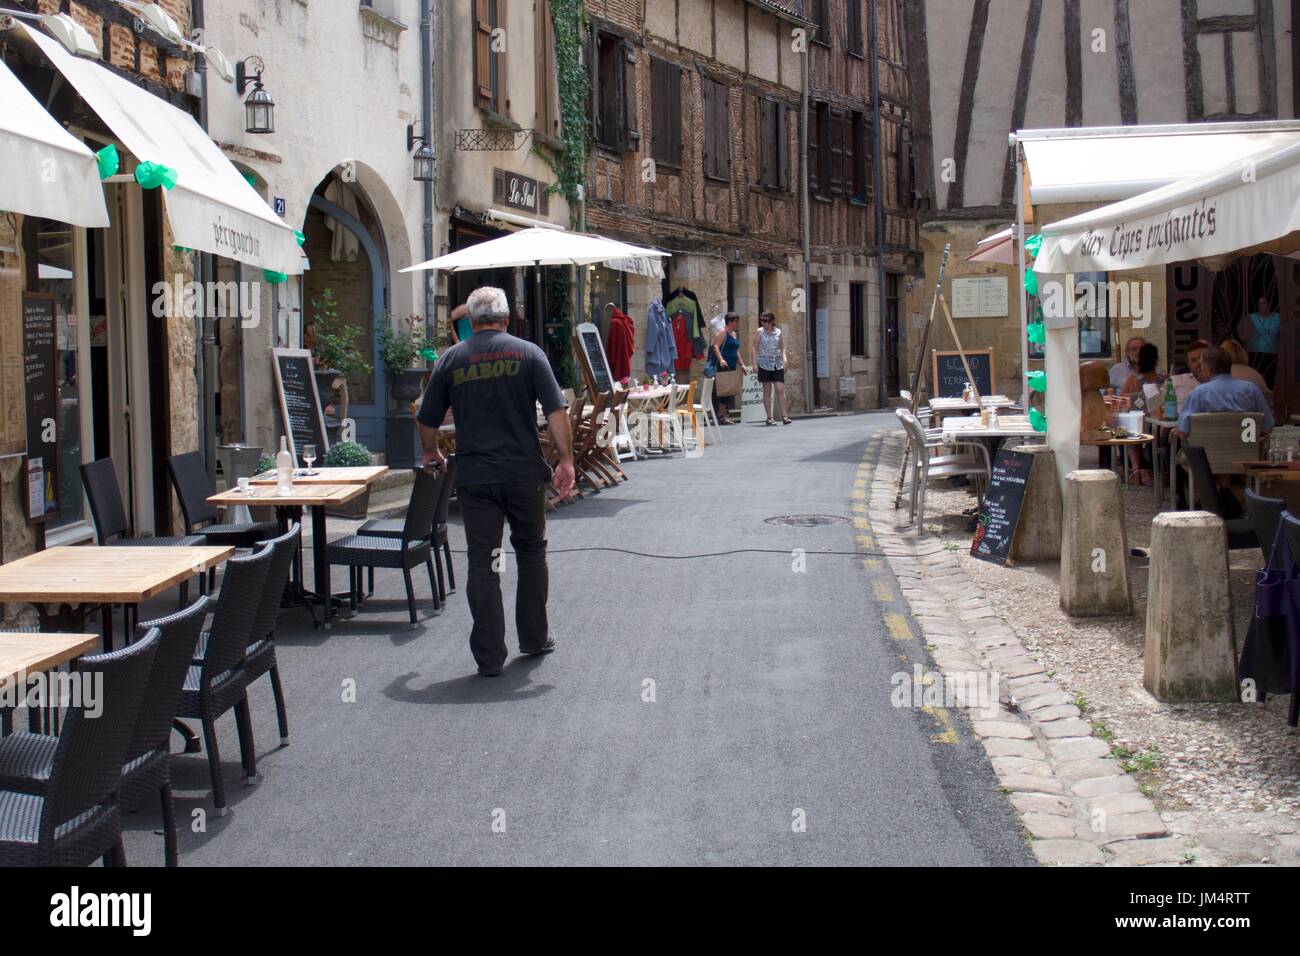 Tourists at outdoor restaurants in traditional street, Bergerac, Dordogne, France Stock Photo